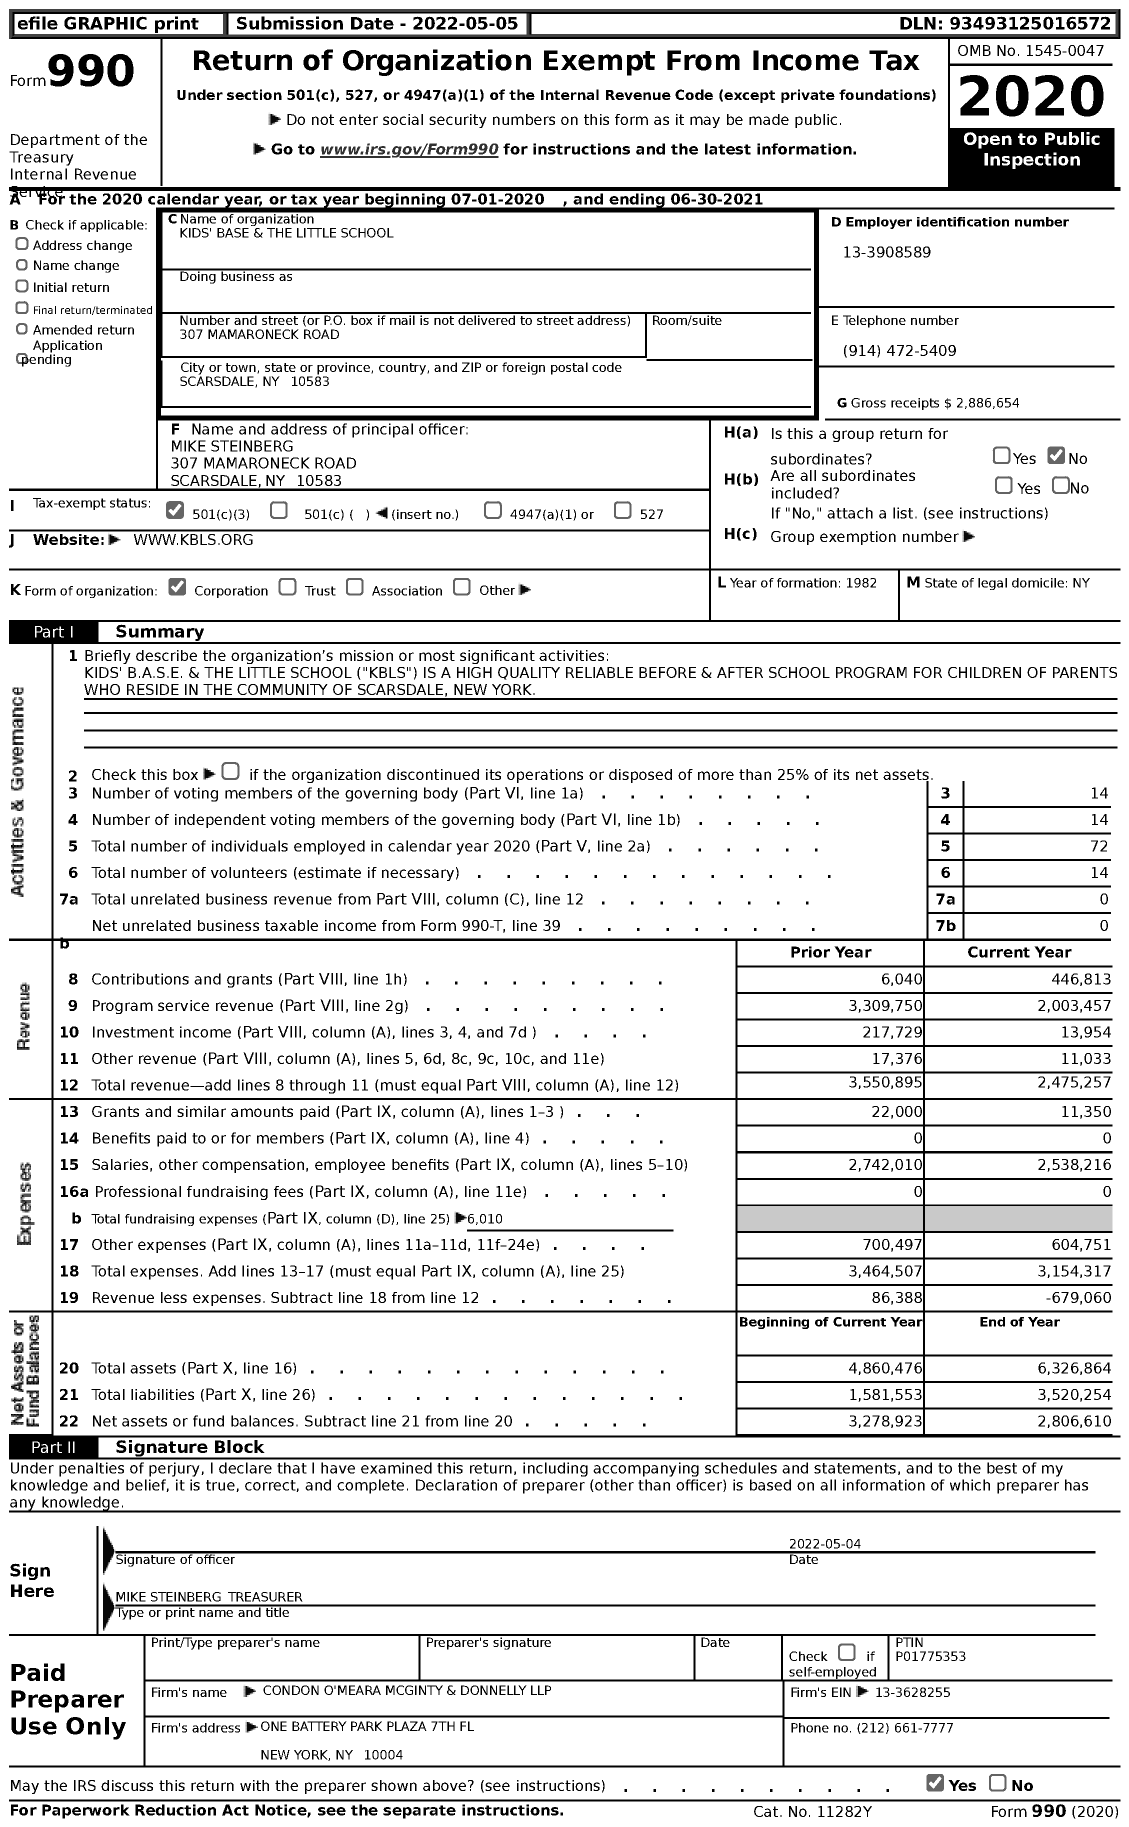 Image of first page of 2020 Form 990 for Kids Base & the Little School